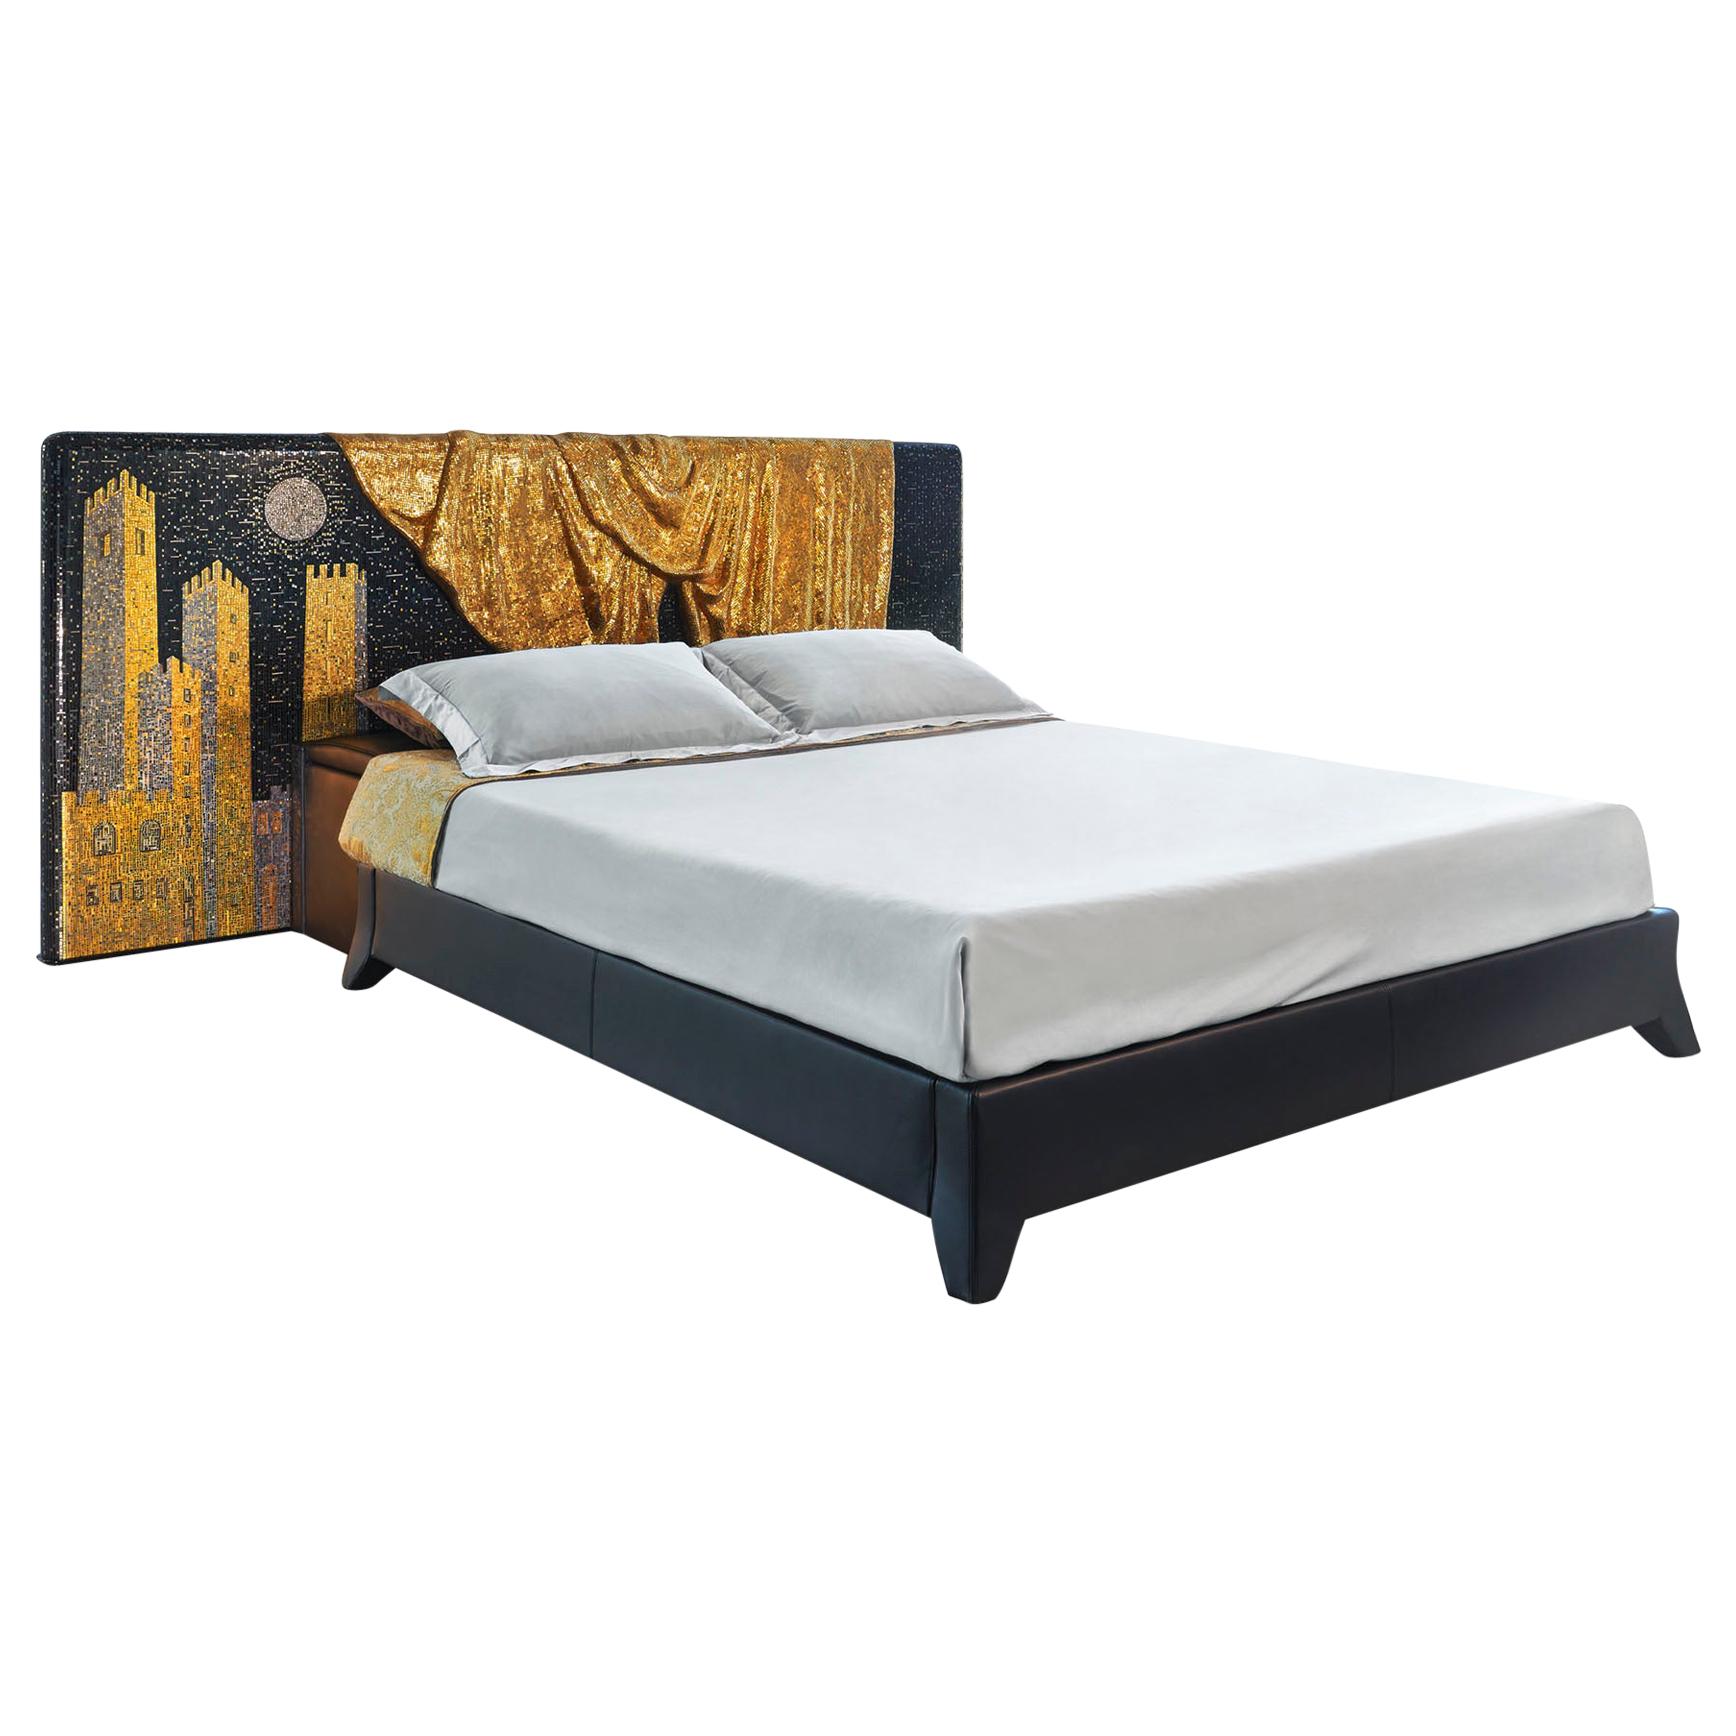 Bed Headboard 3D Artistic Mosaic Gold Leaf Base & Box Leather Motorized Opening For Sale